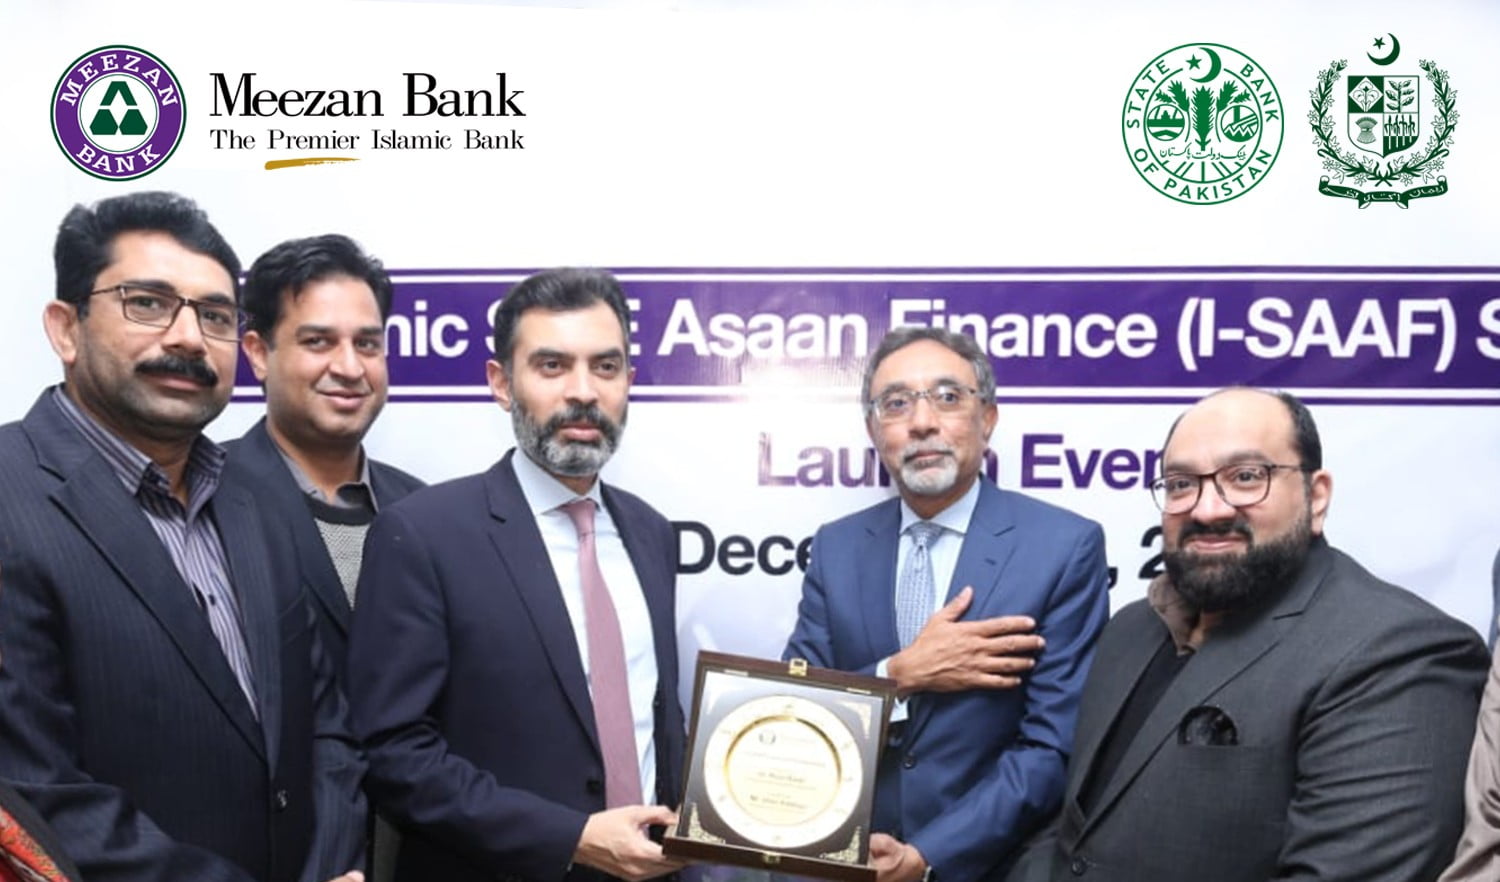 Meezan Bank becomes the First Bank in the Country to Launch SBP’s I-SAAF Scheme for Small and Medium Enterprises